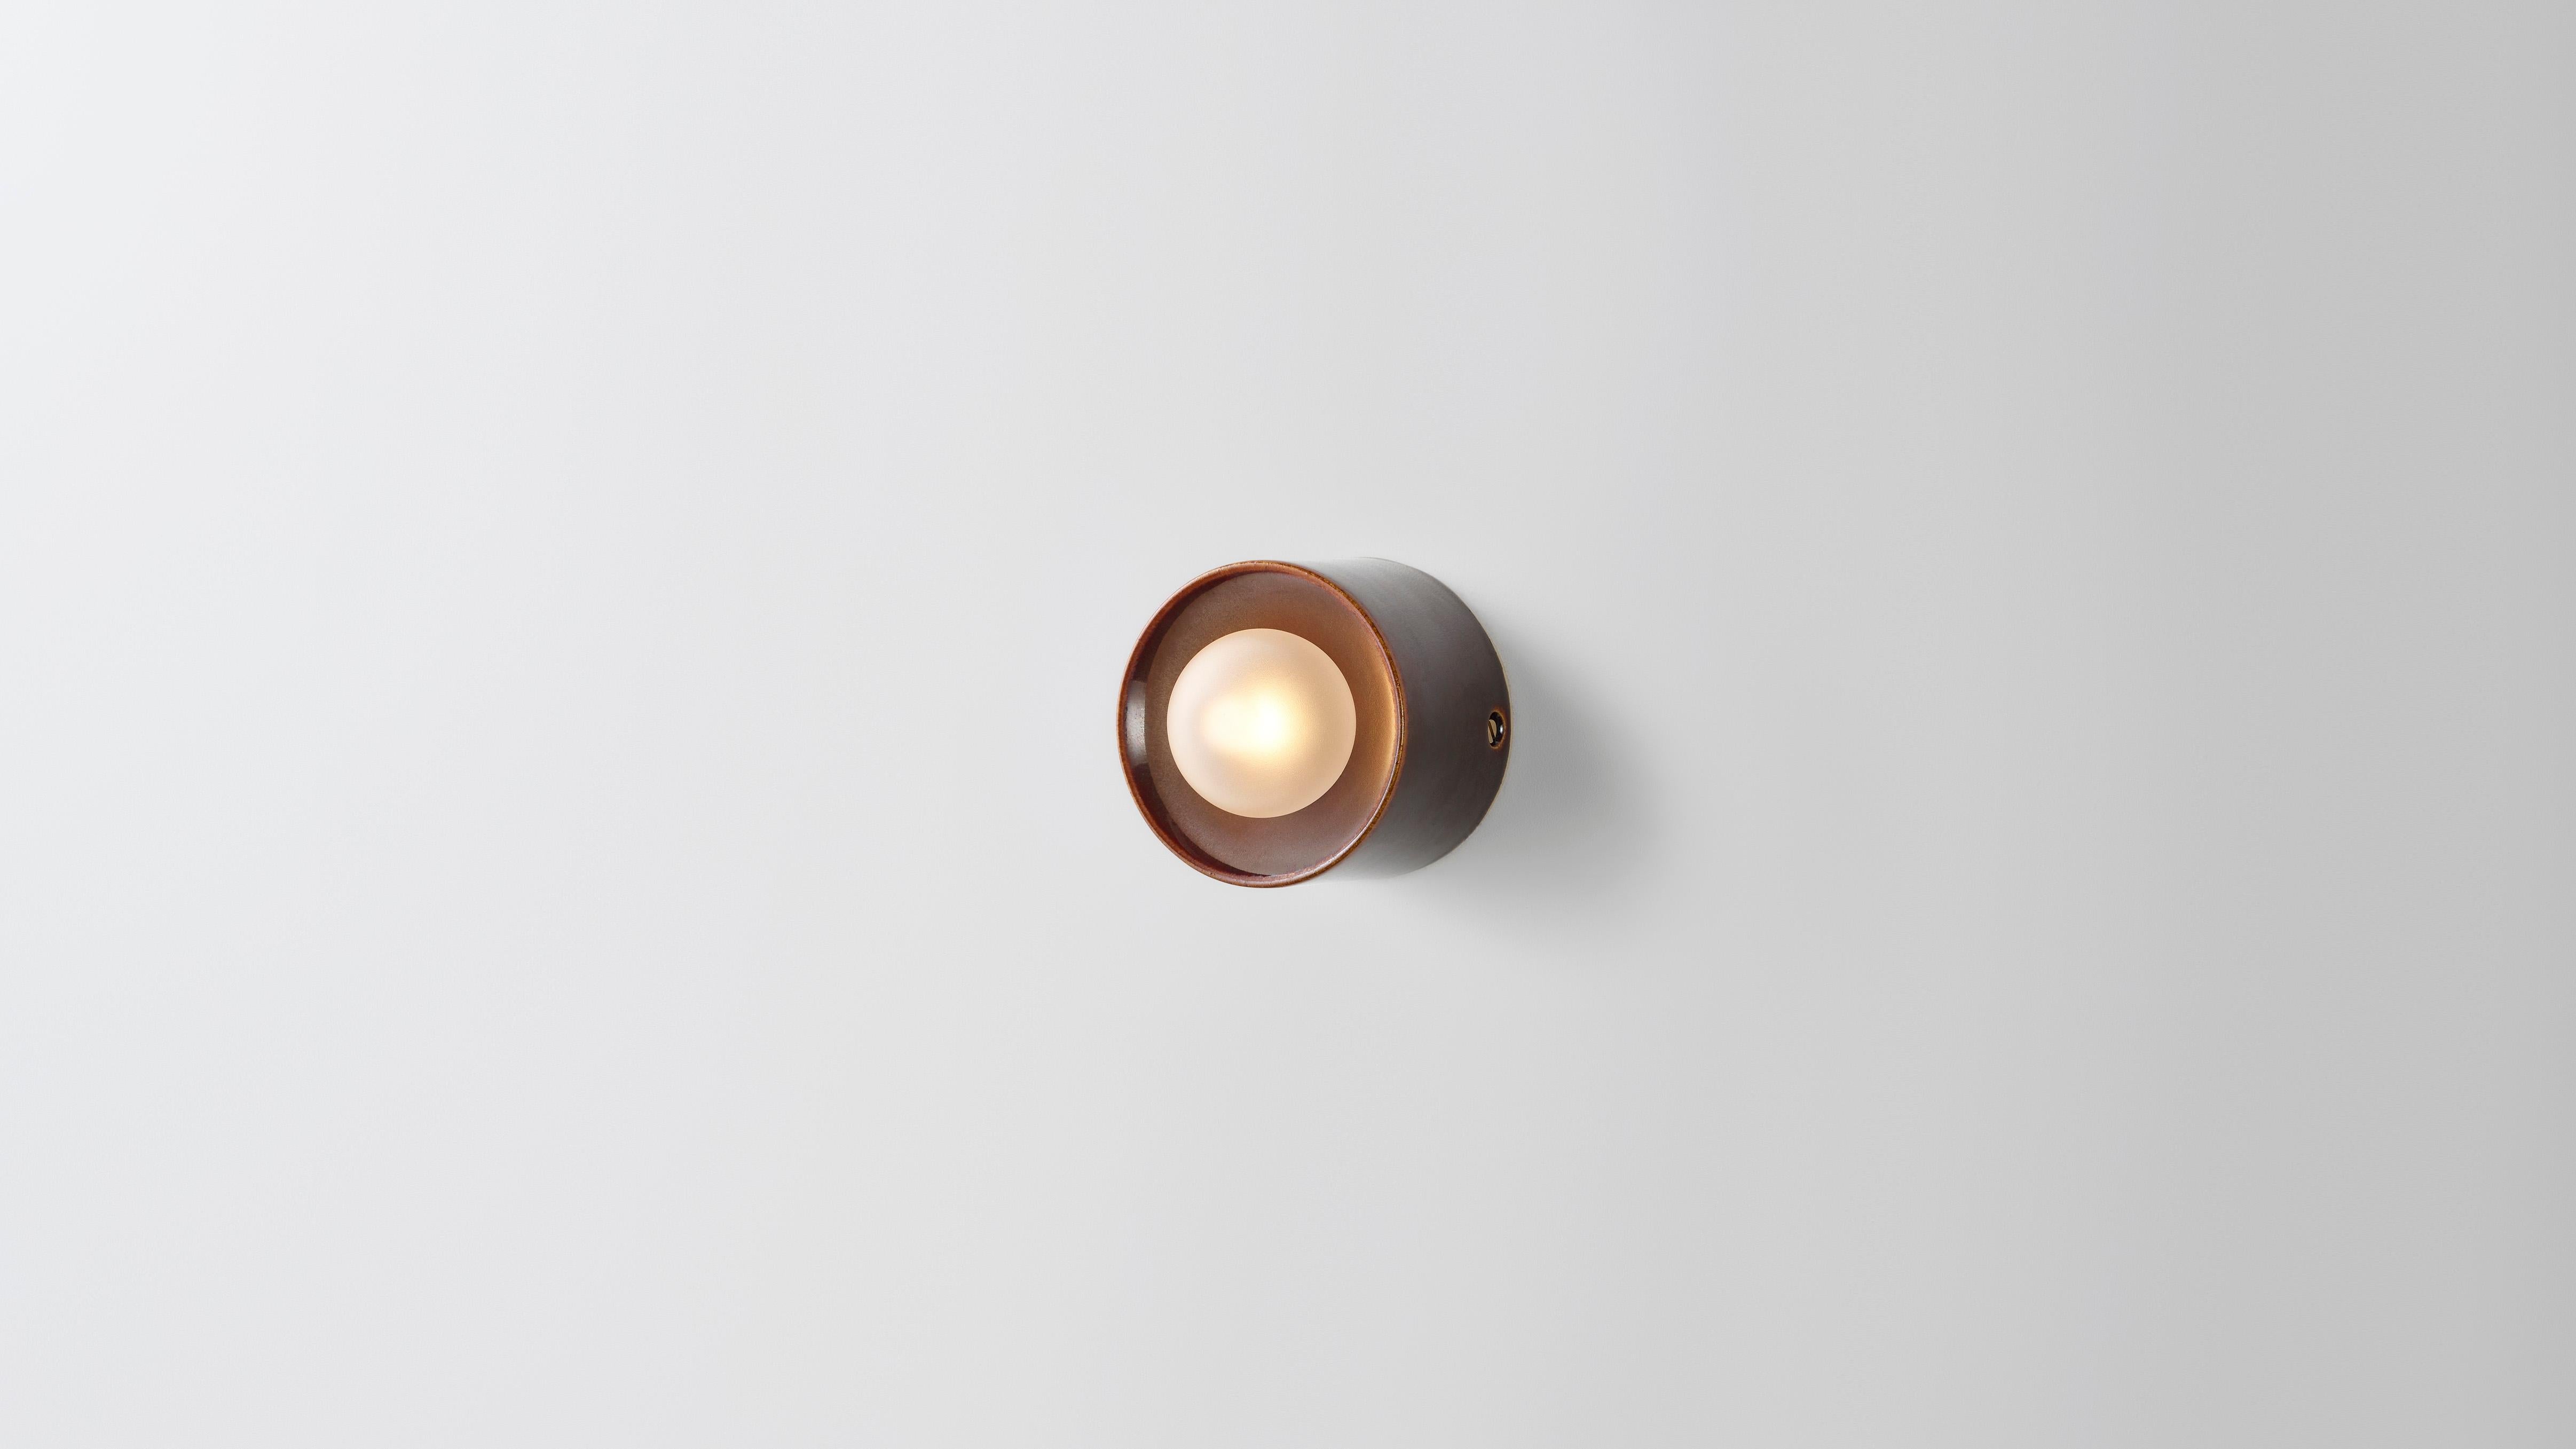 Anton Micro in brown ceramic by Volker Haug 
Anton series
Dimensions: Ø 8 x D 6 cm.
Materials: Cast Ceramic
Glaze: Brown
Lamp: G9 LED (240V / 120V US). 12V option available
Glass Bulb : 4.5 cm ø, Frosted
Weight : 1kg

Anton Micro is the smallest in